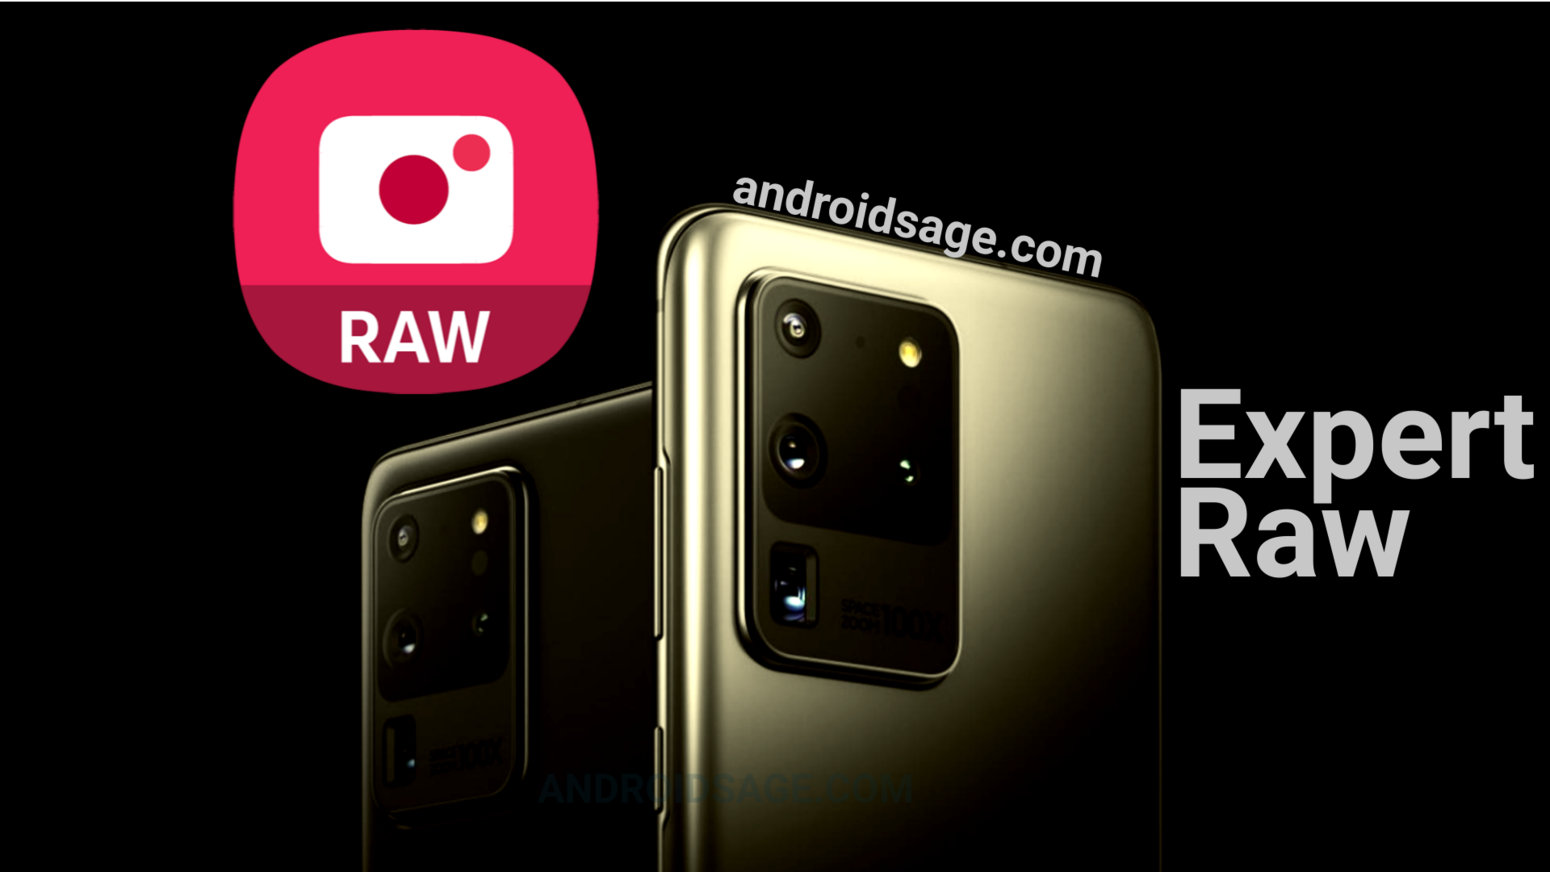 Expert Raw APK Download for Galaxy S20 Ultra Note 20 Ultra and Fold 2